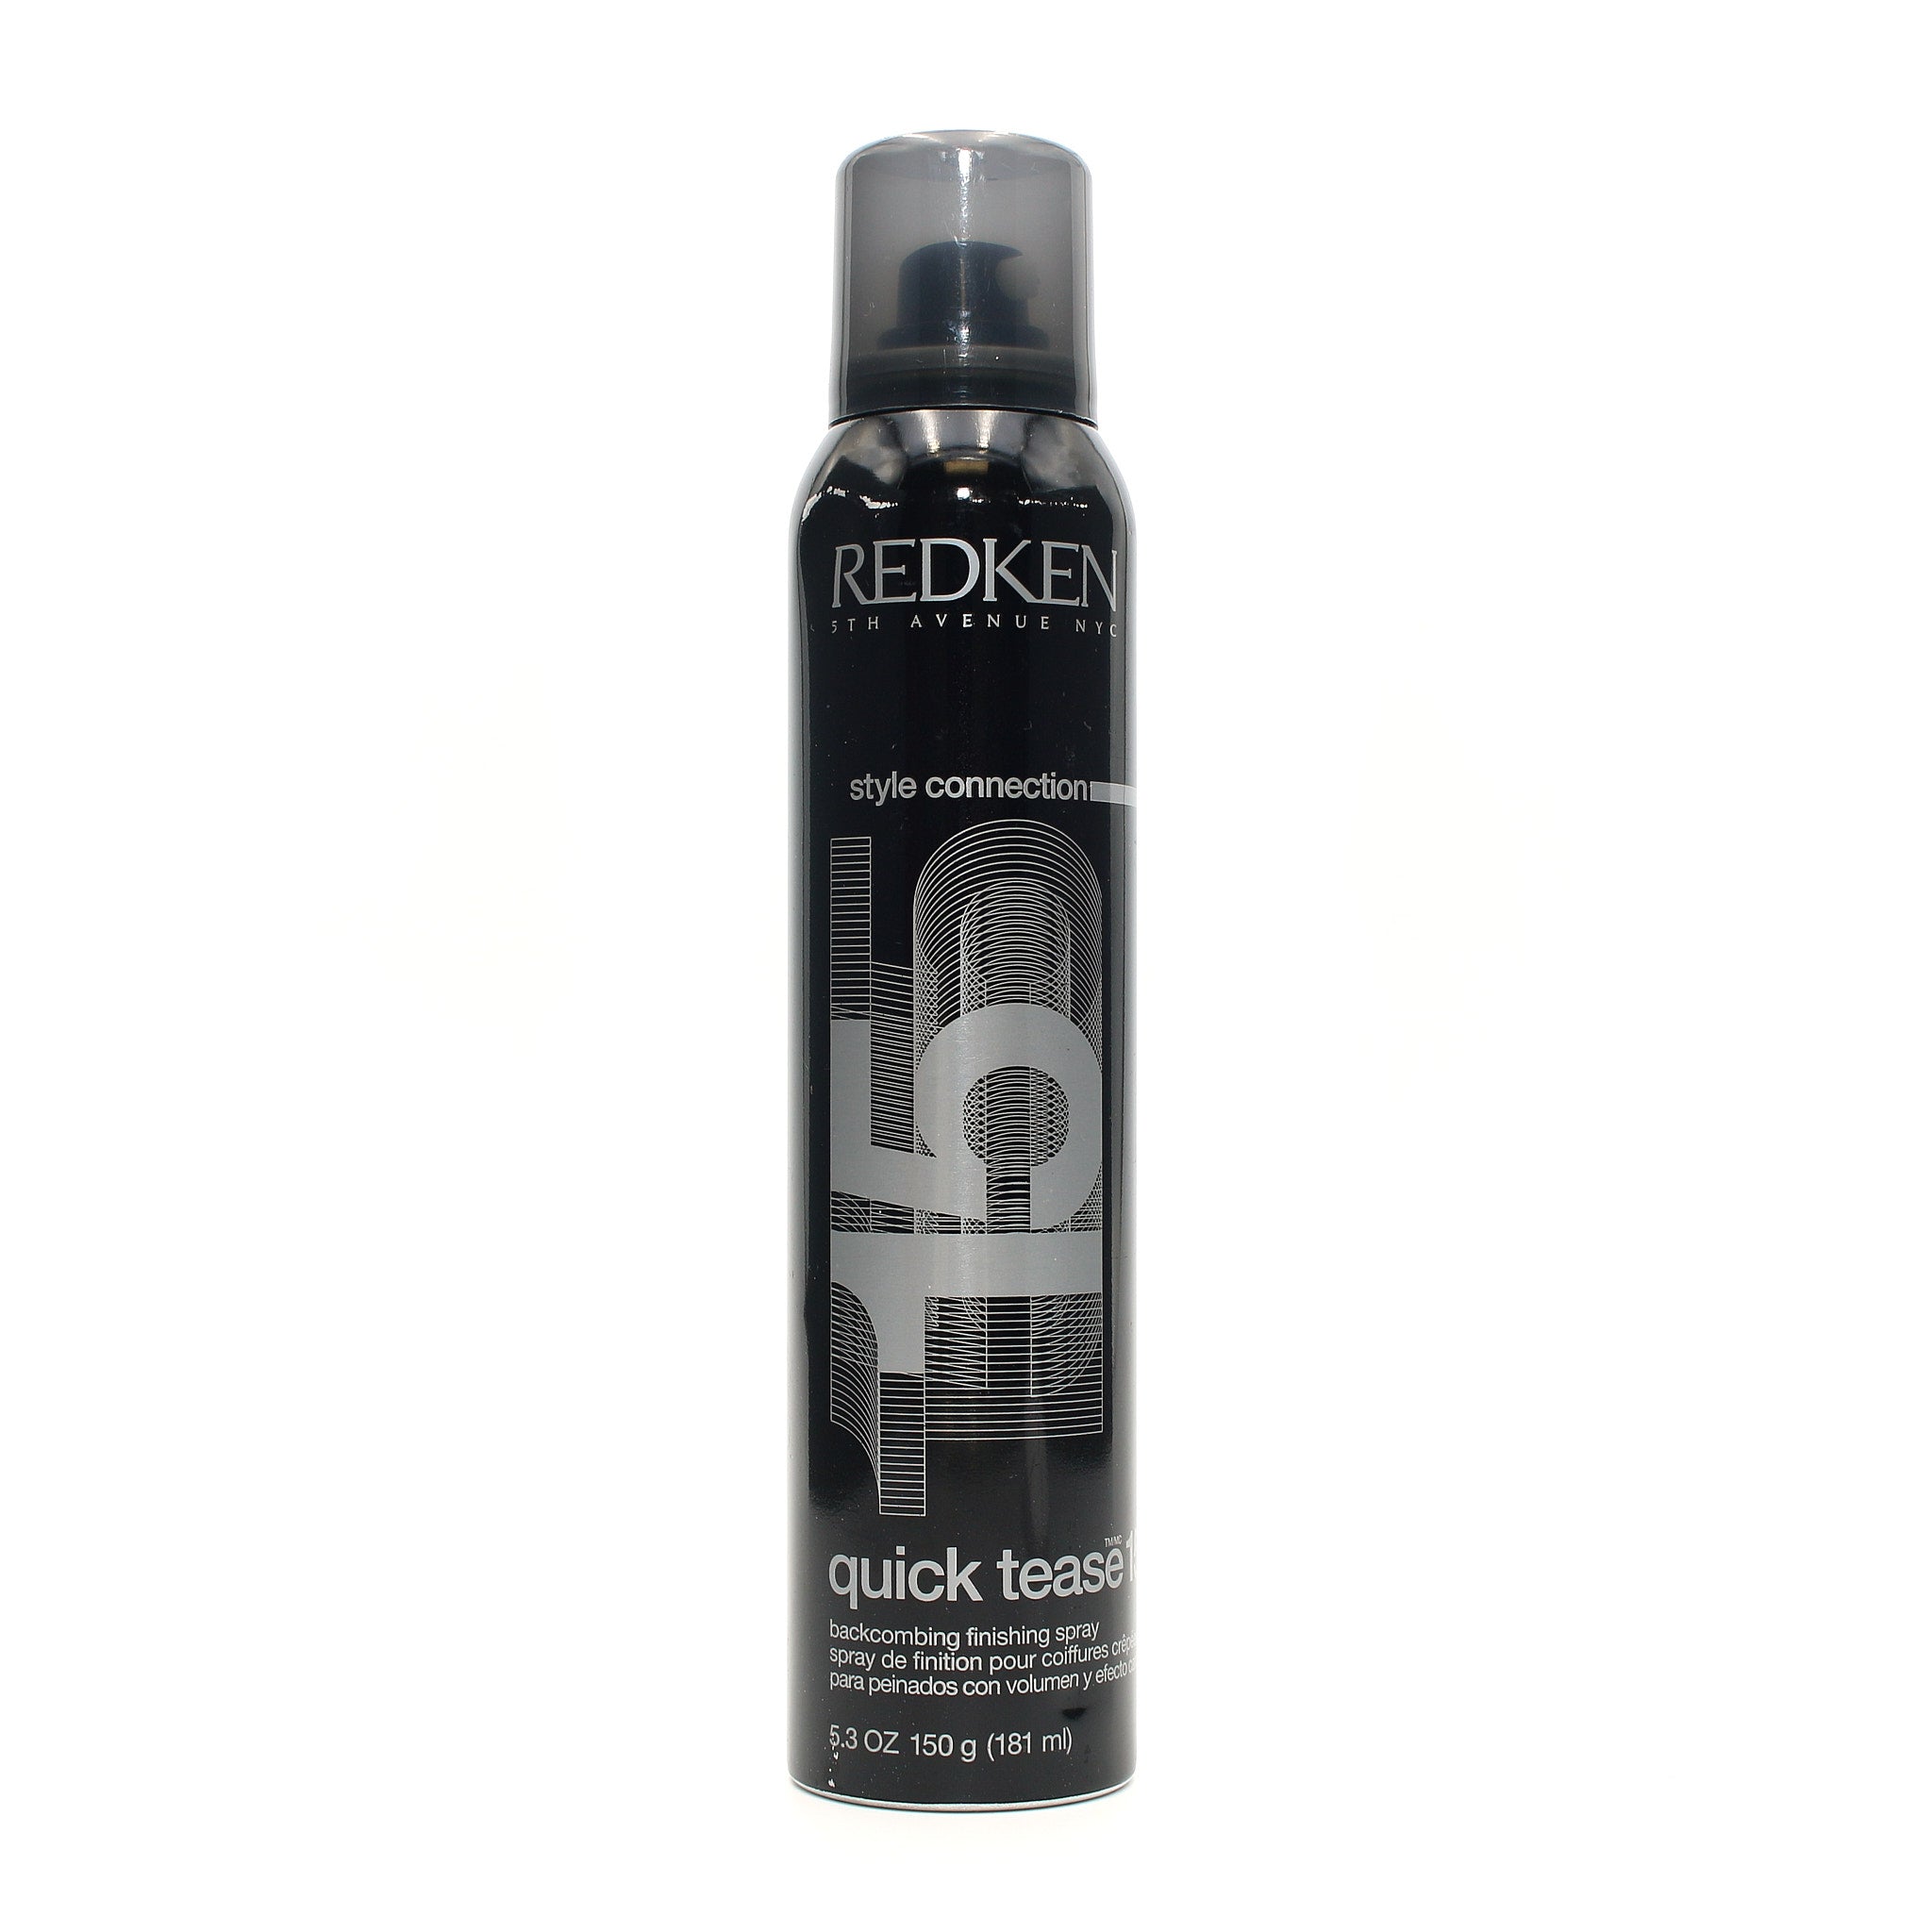 REDKEN Style Connection 15 Quick Tease Backcombing Finishing Spray 5.3 oz